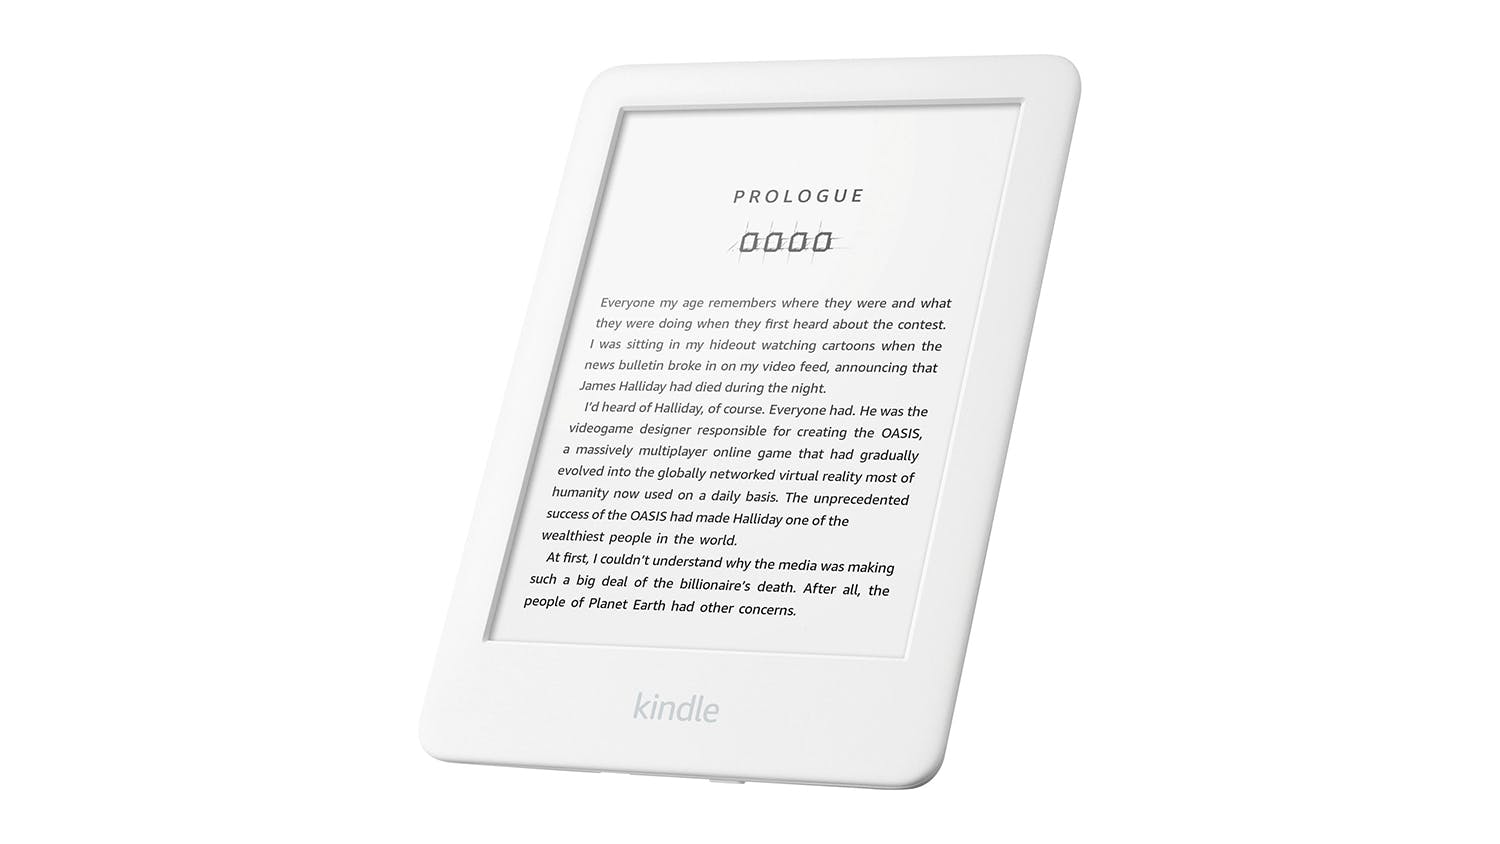 Amazon Kindle Touch 6" eReader 10th Gen (2020) Wi-Fi - White